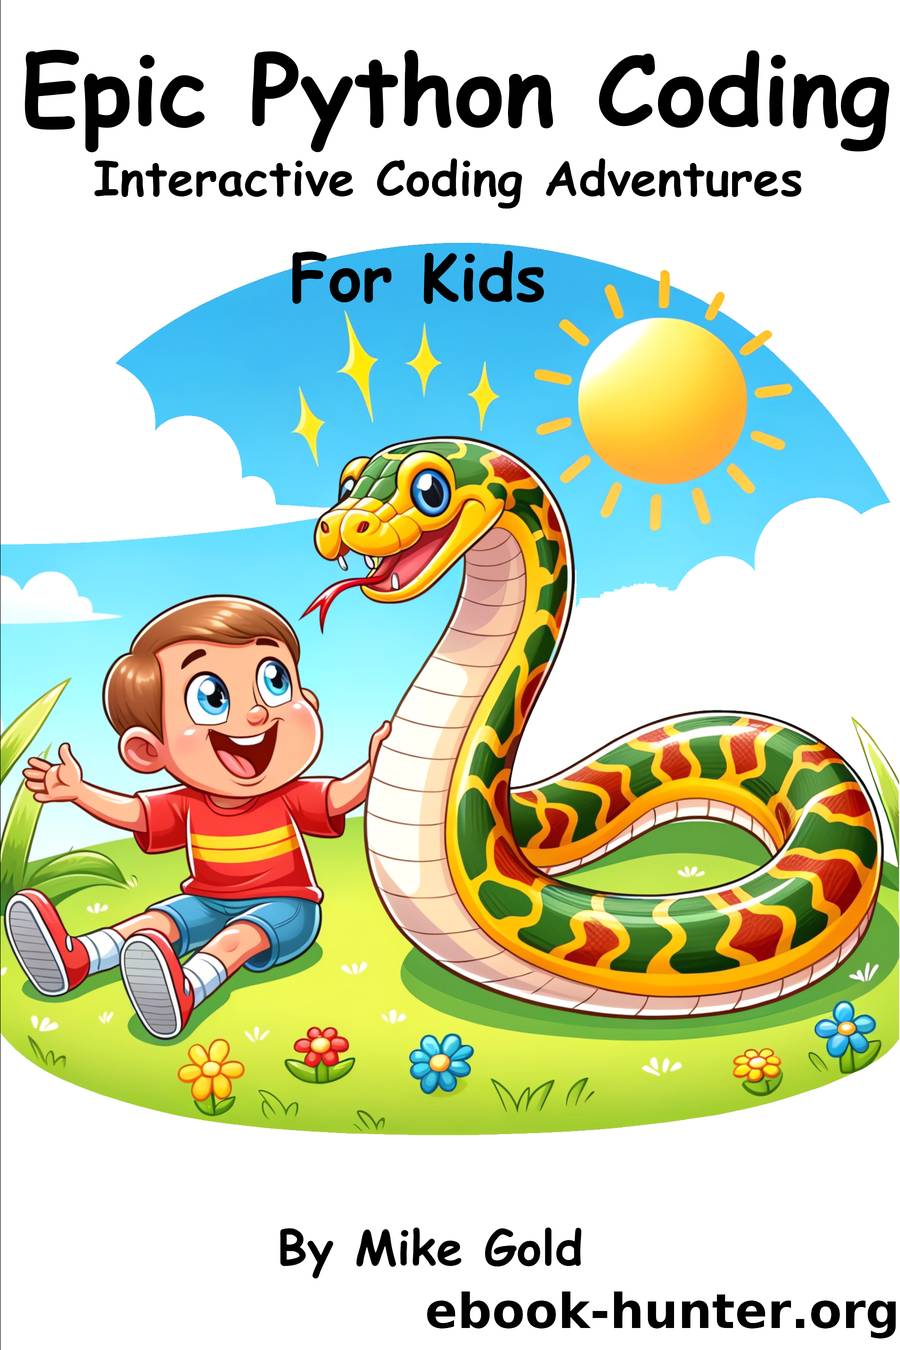 Epic Python Coding: Interactive Coding Adventures for Kids by Mike Gold